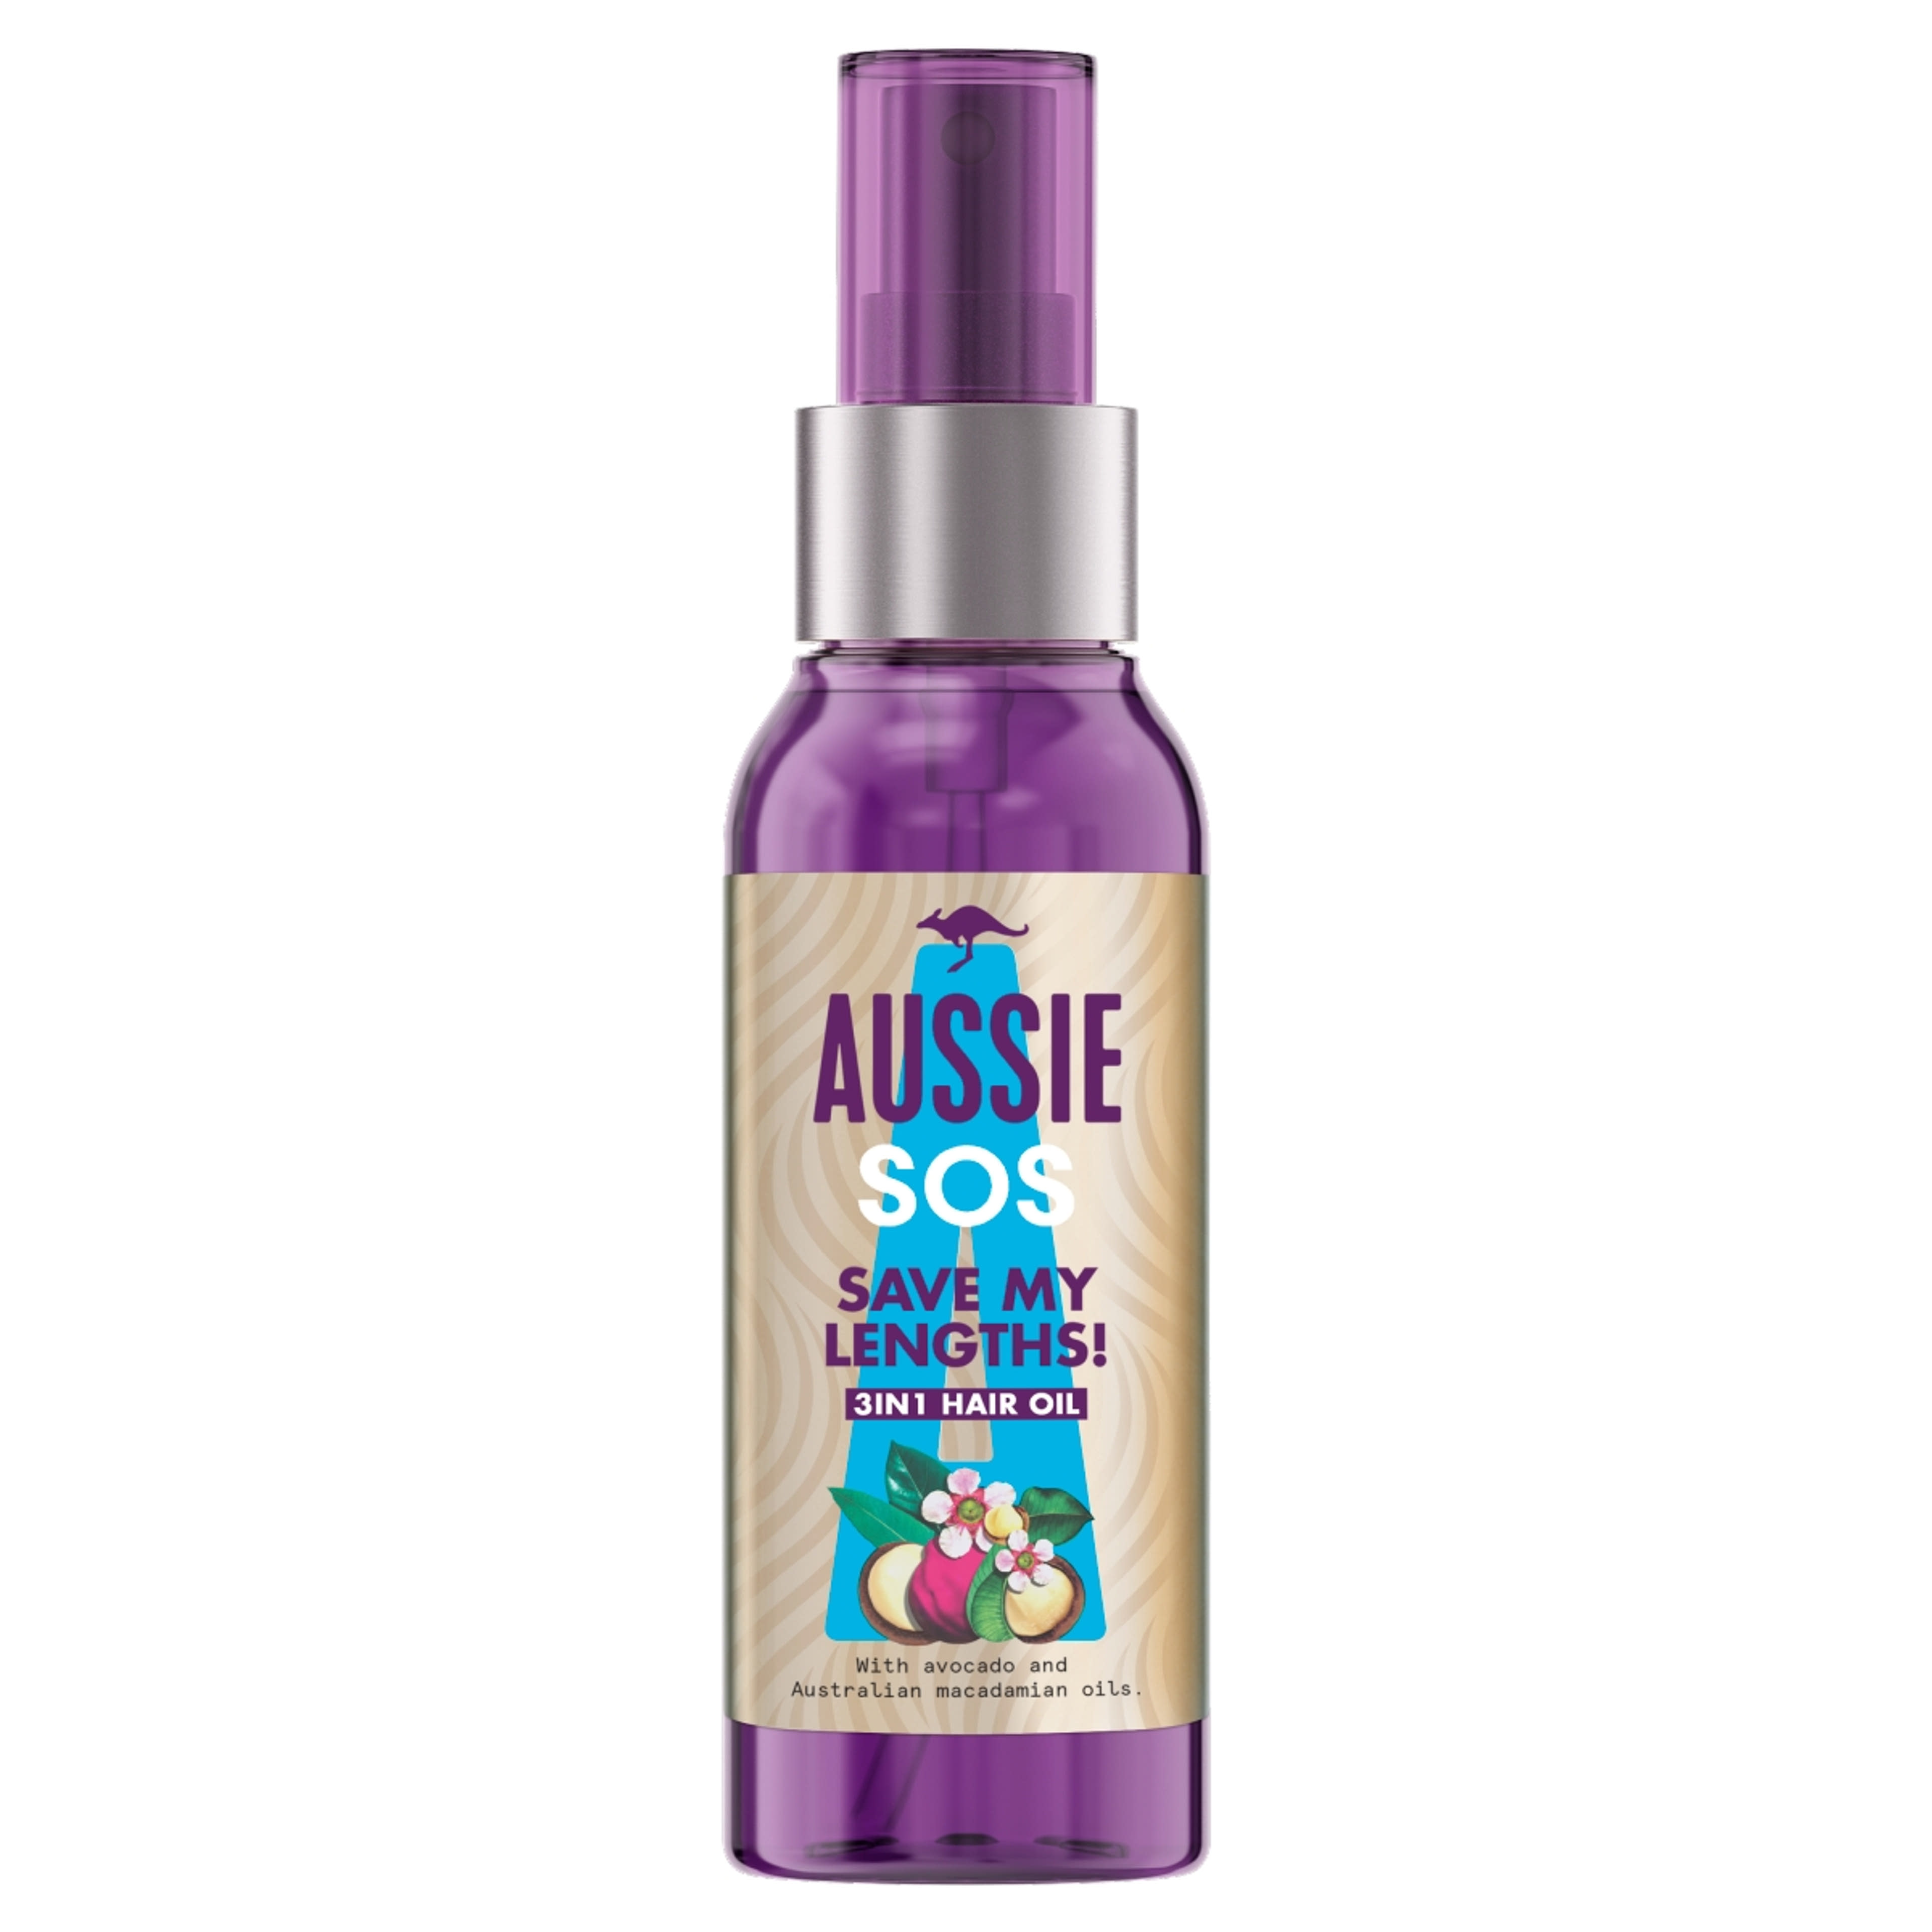 Aussie Sos Save My Length 3in1 oil - 100 ml